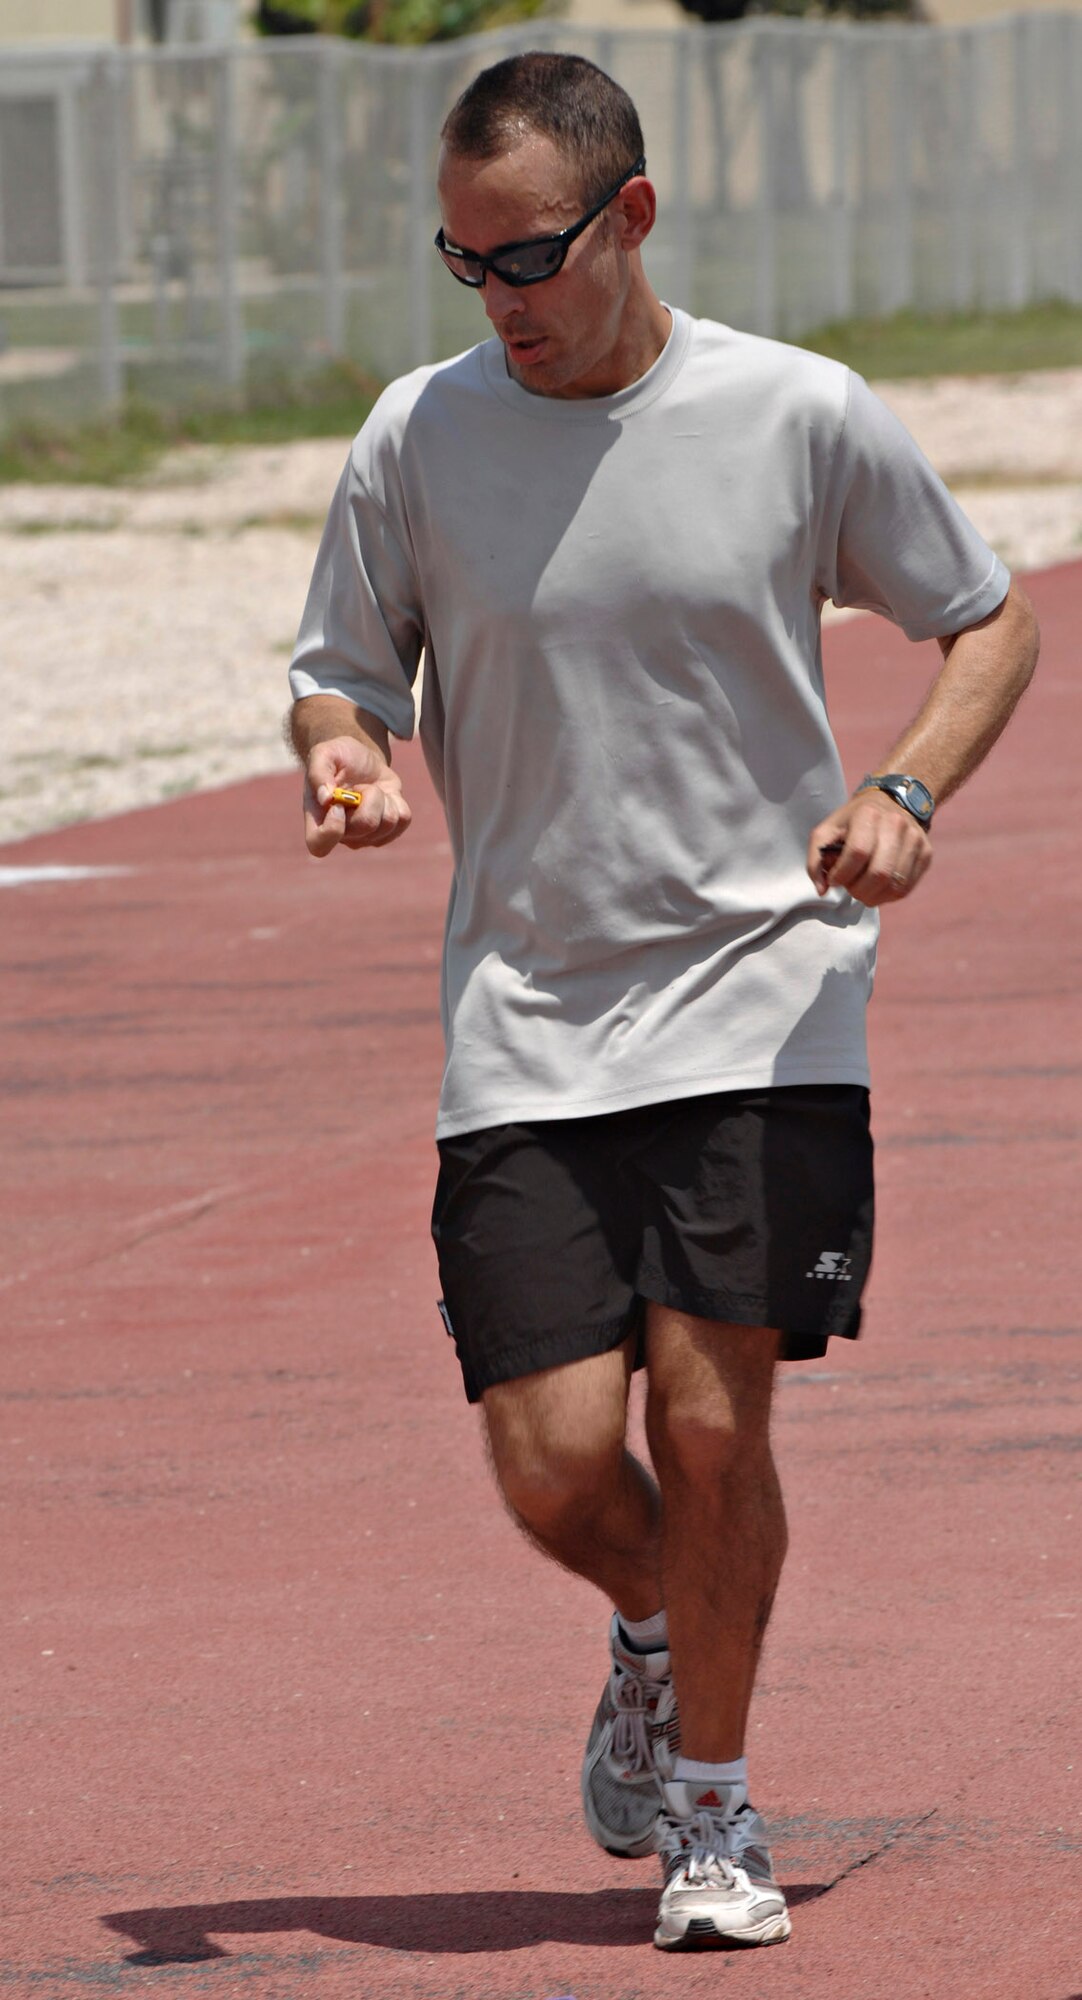 Capt. Theodore Rieth, 39th Air Base Wing sexual assault response coordinator, marks a lap on his hand held counter as he runs in the Relay for Life at the Incirlik running track, May 9, 2009. Captain Rieth was a member of the Team WSA and ran and walked 50 miles for the relay. The 2009 Relay for Life was the first relay available to members of the Incirlik community and hosted more than 300 participants from 20 teams, raising more than $9,500. The event lasted 12 hours and included a luminaria ceremony in which participants wrote the names of cancer survivors and victims on more than 100 luminary bags. (U.S. Air Force photo/Senior Airman Benjamin Wilson)